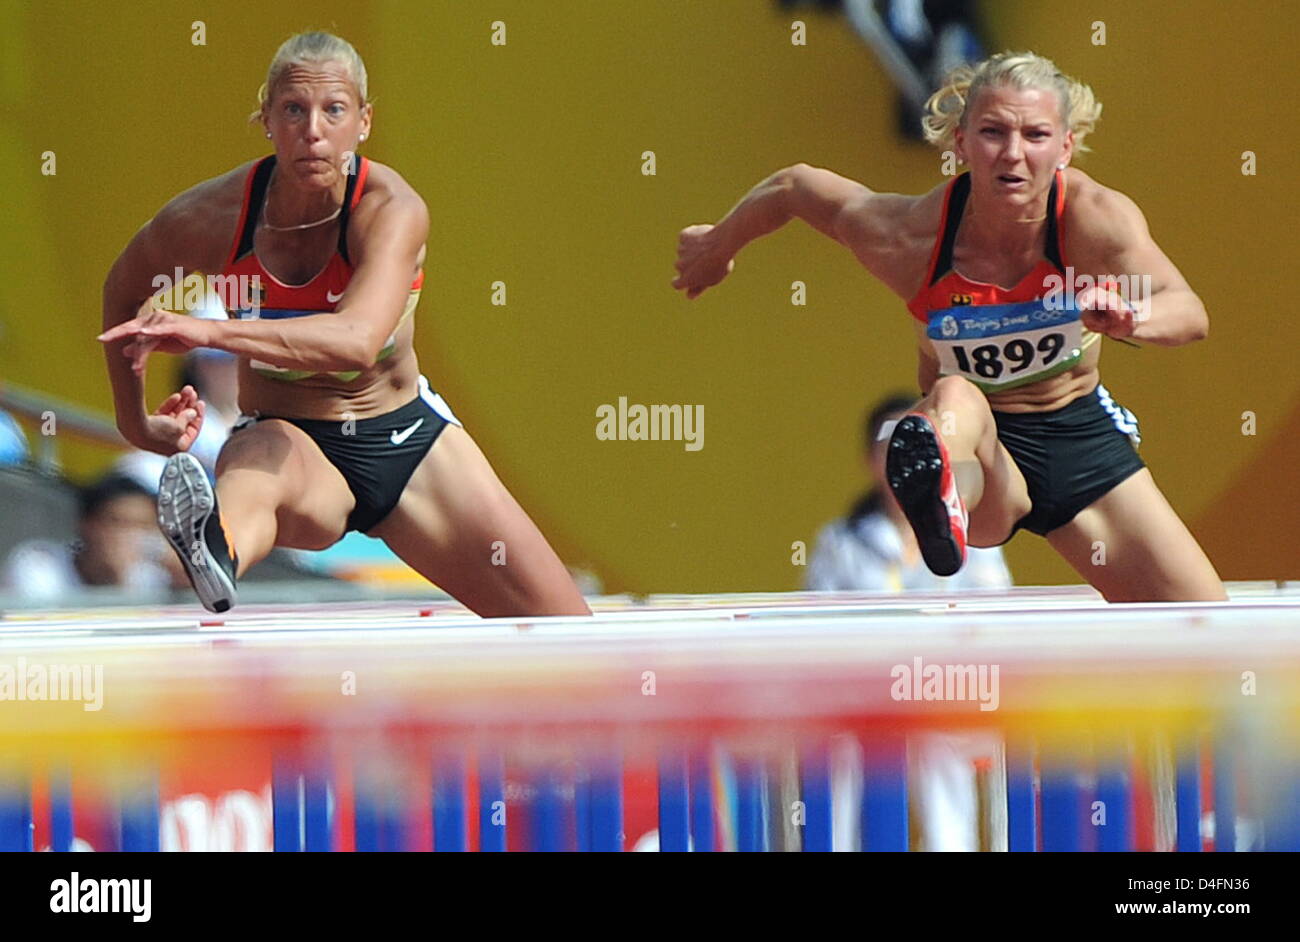 German Jennifer Oeser (L) and Lilli Schwarzkopf (R) compete in the women's heptathlon 100m hurdles of the Athletics events in the National Stadium at the Beijing 2008 Olympic Games, Beijing, China, 15 August 2008. Photo: Karl-Josef Hildenbrand dpa (c) dpa - Bildfunk Stock Photo